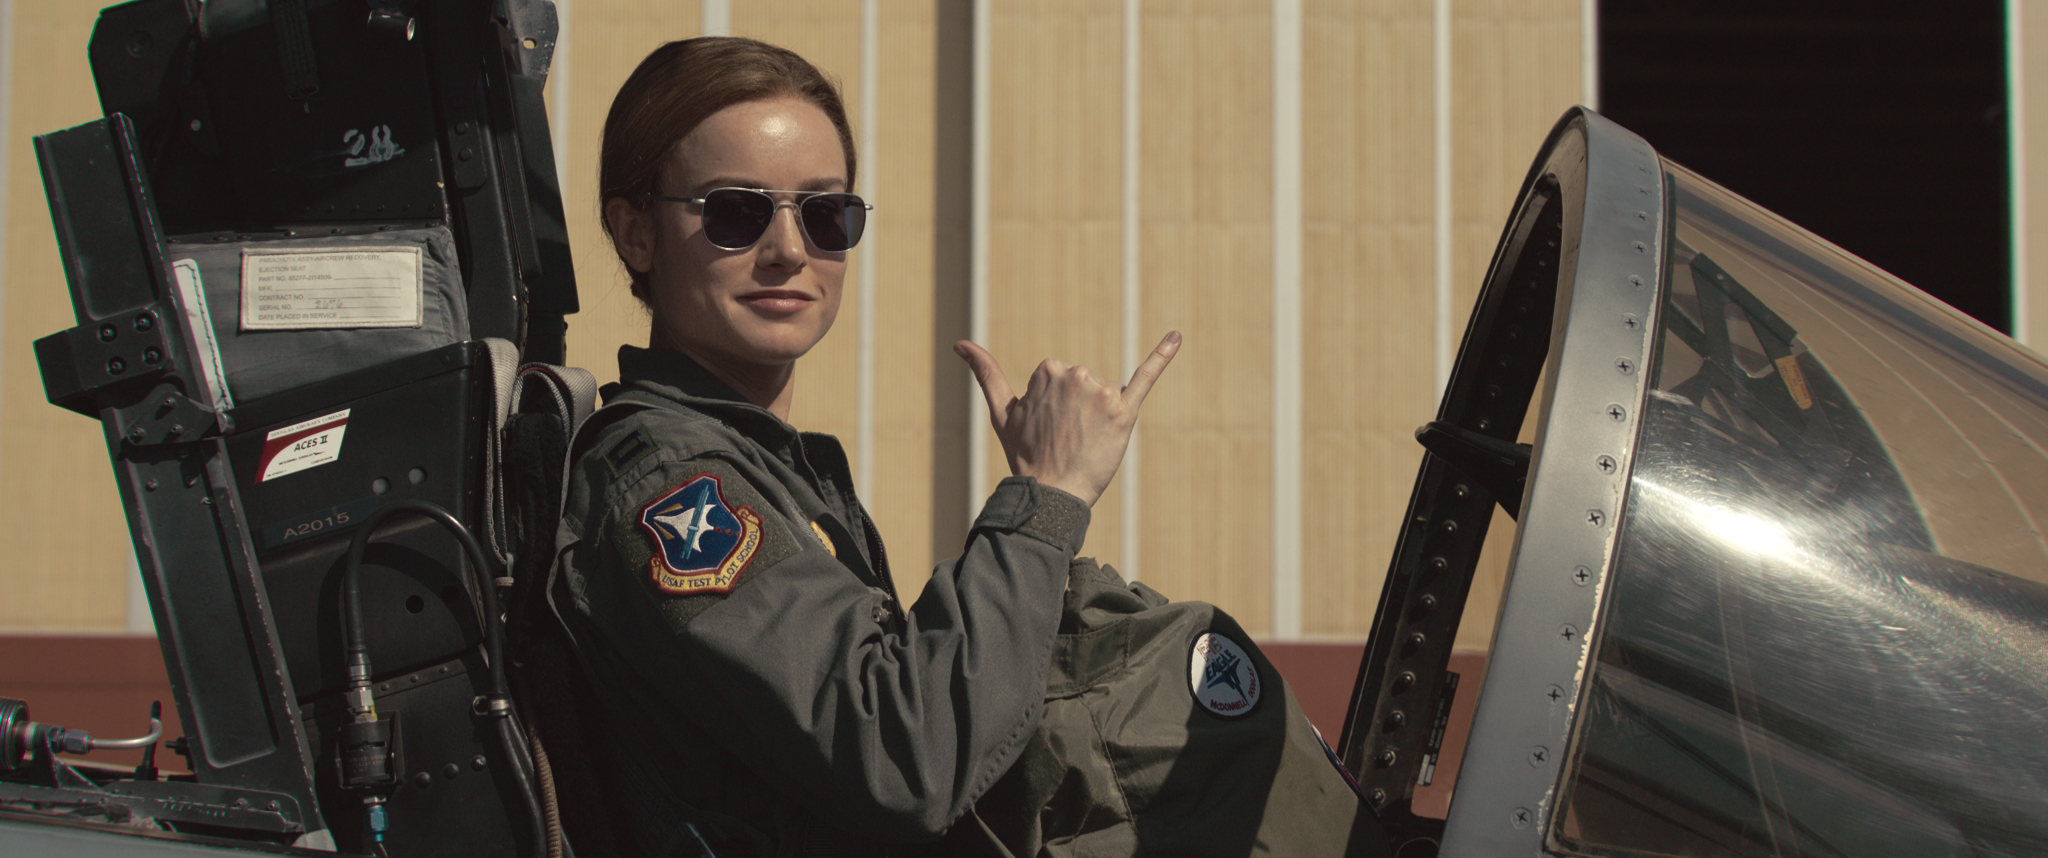 More Captain Marvel High-Res Images Released | Cosmic Book News